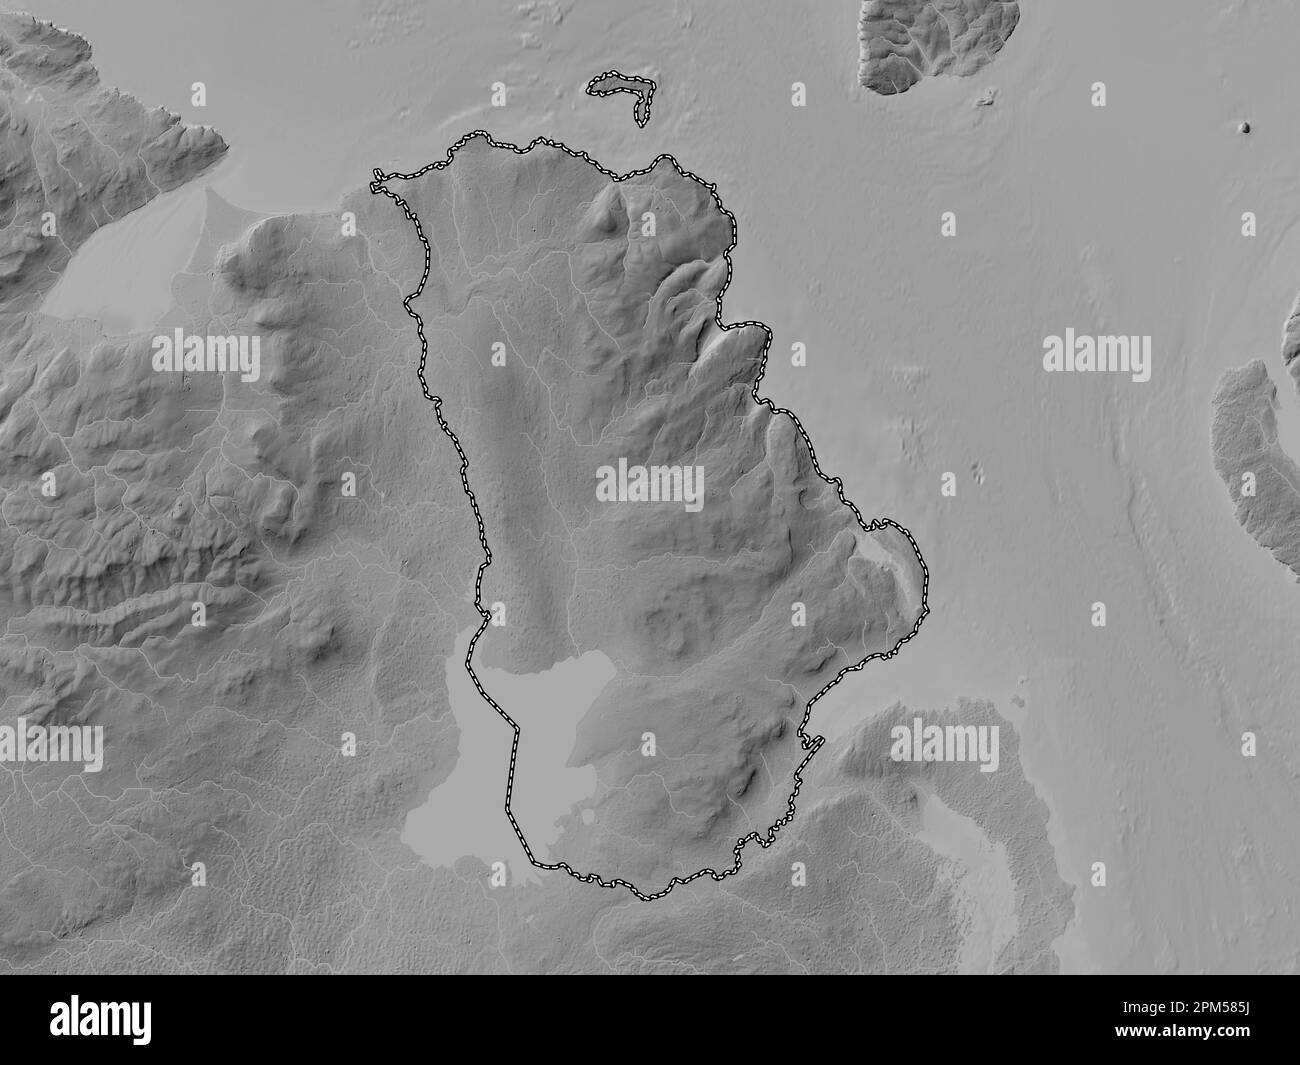 Antrim, region of Northern Ireland. Grayscale elevation map with lakes and rivers Stock Photo